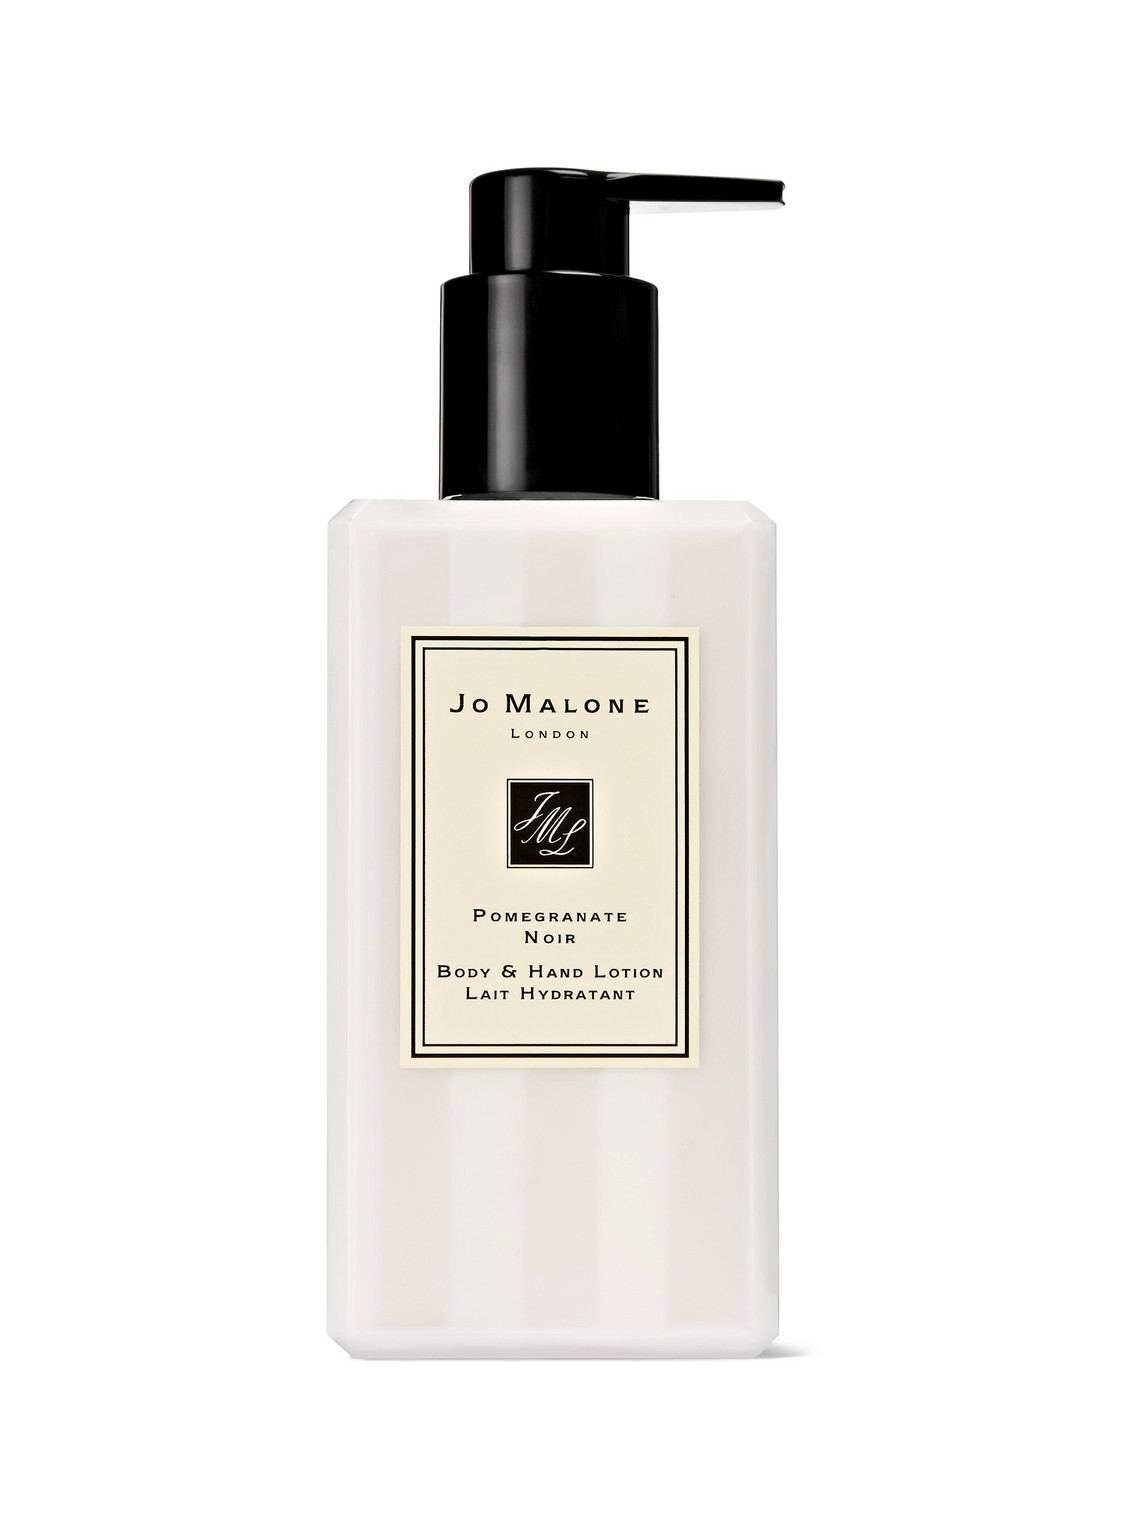 Jo Malone London Pomegranate Noir Body & Hand Lotion, 250ml In Colorless